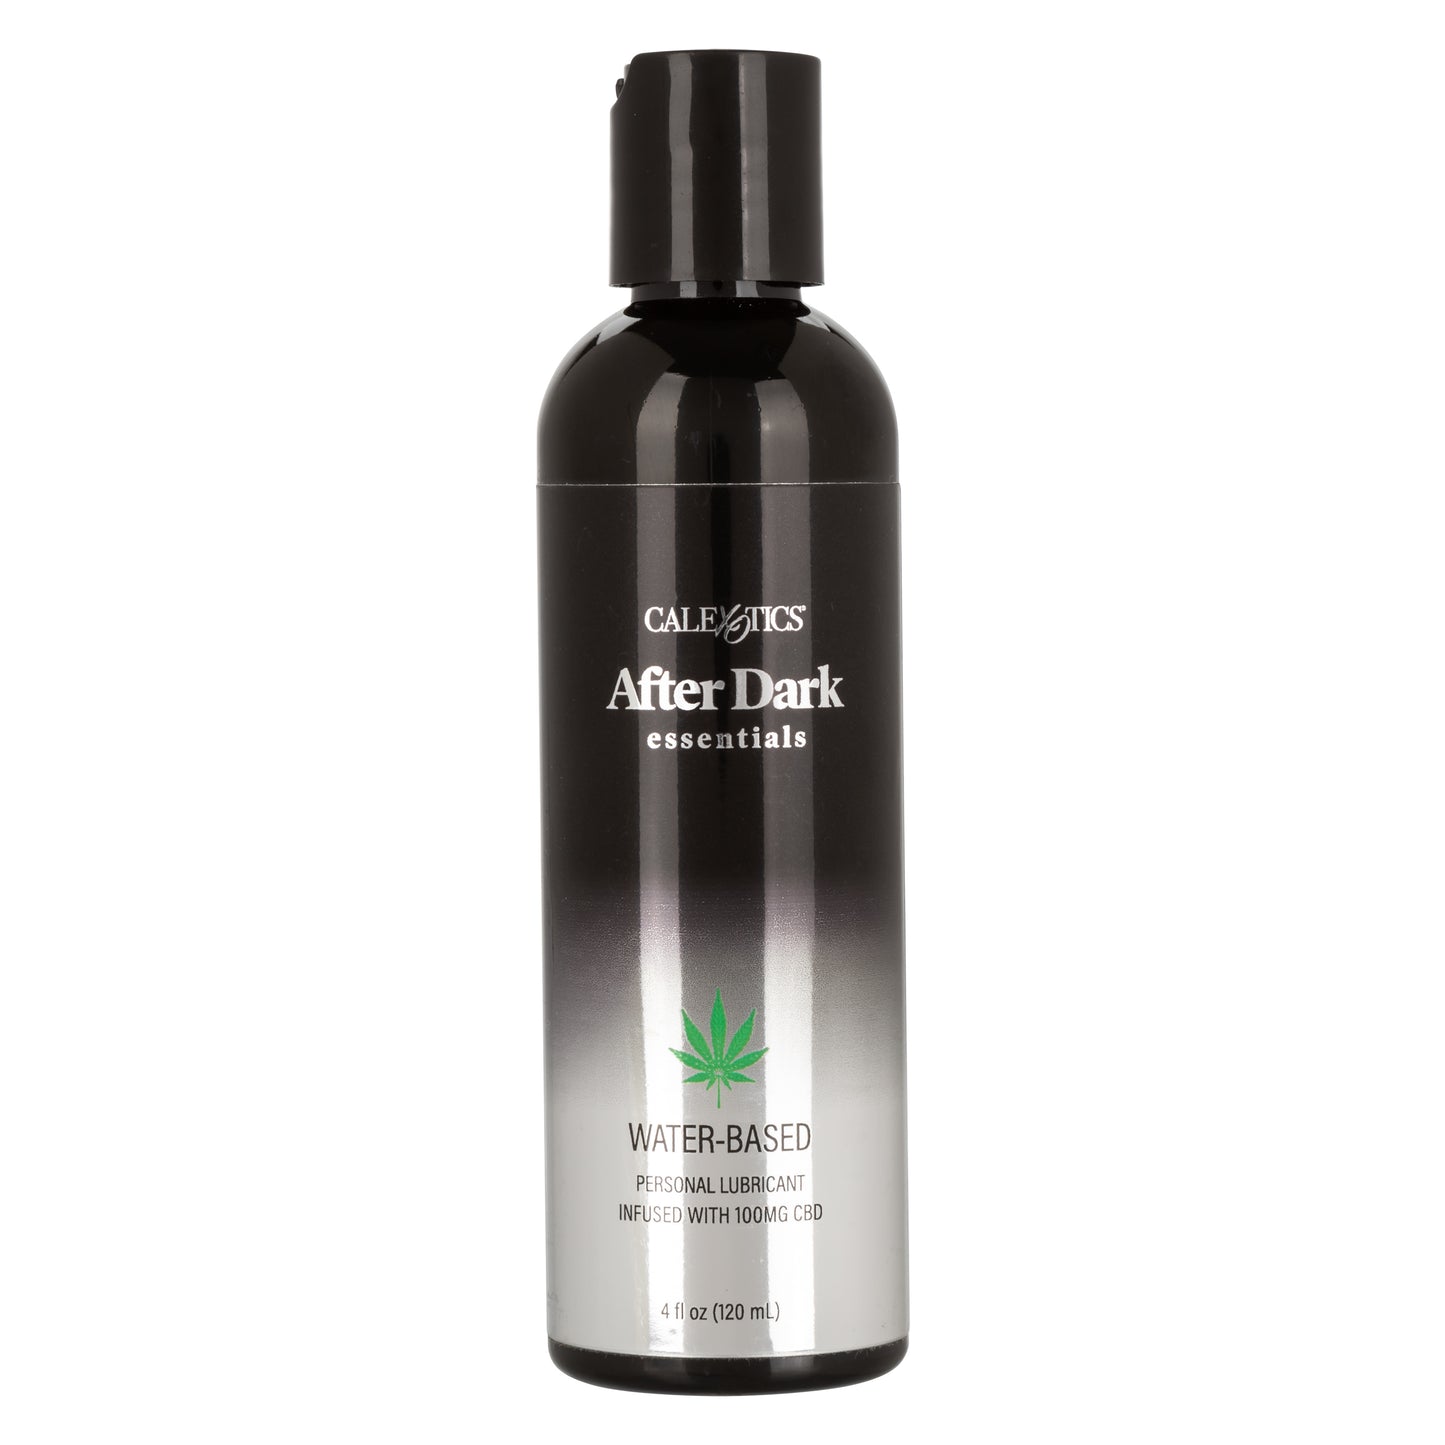 After Dark Essentials™ Water-Based Personal Lubricant Infused with CBD 4 fl. oz.